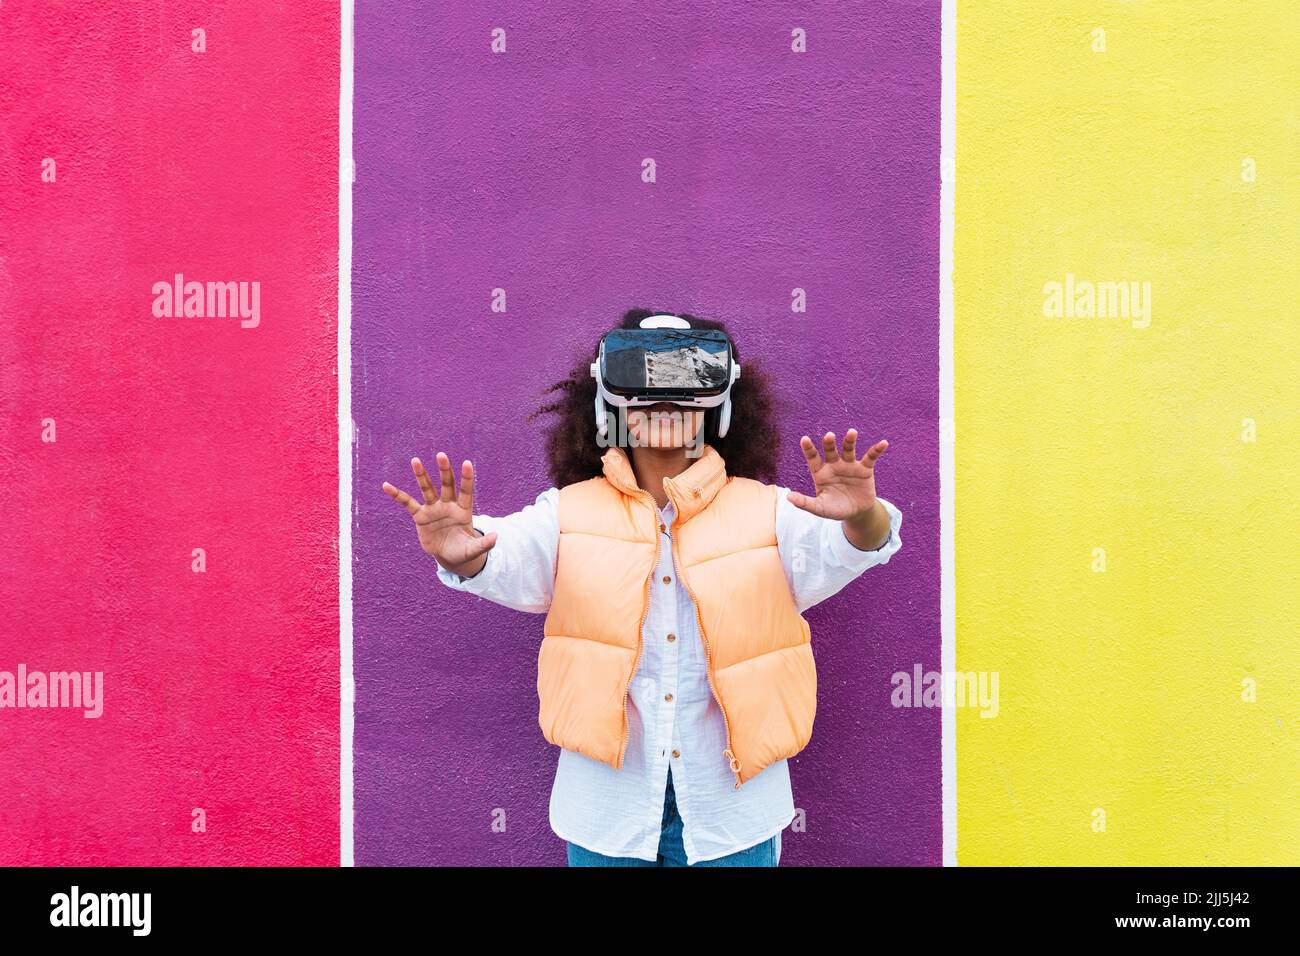 Girl wearing virtual reality simulator gesturing in front of colorful wall Stock Photo